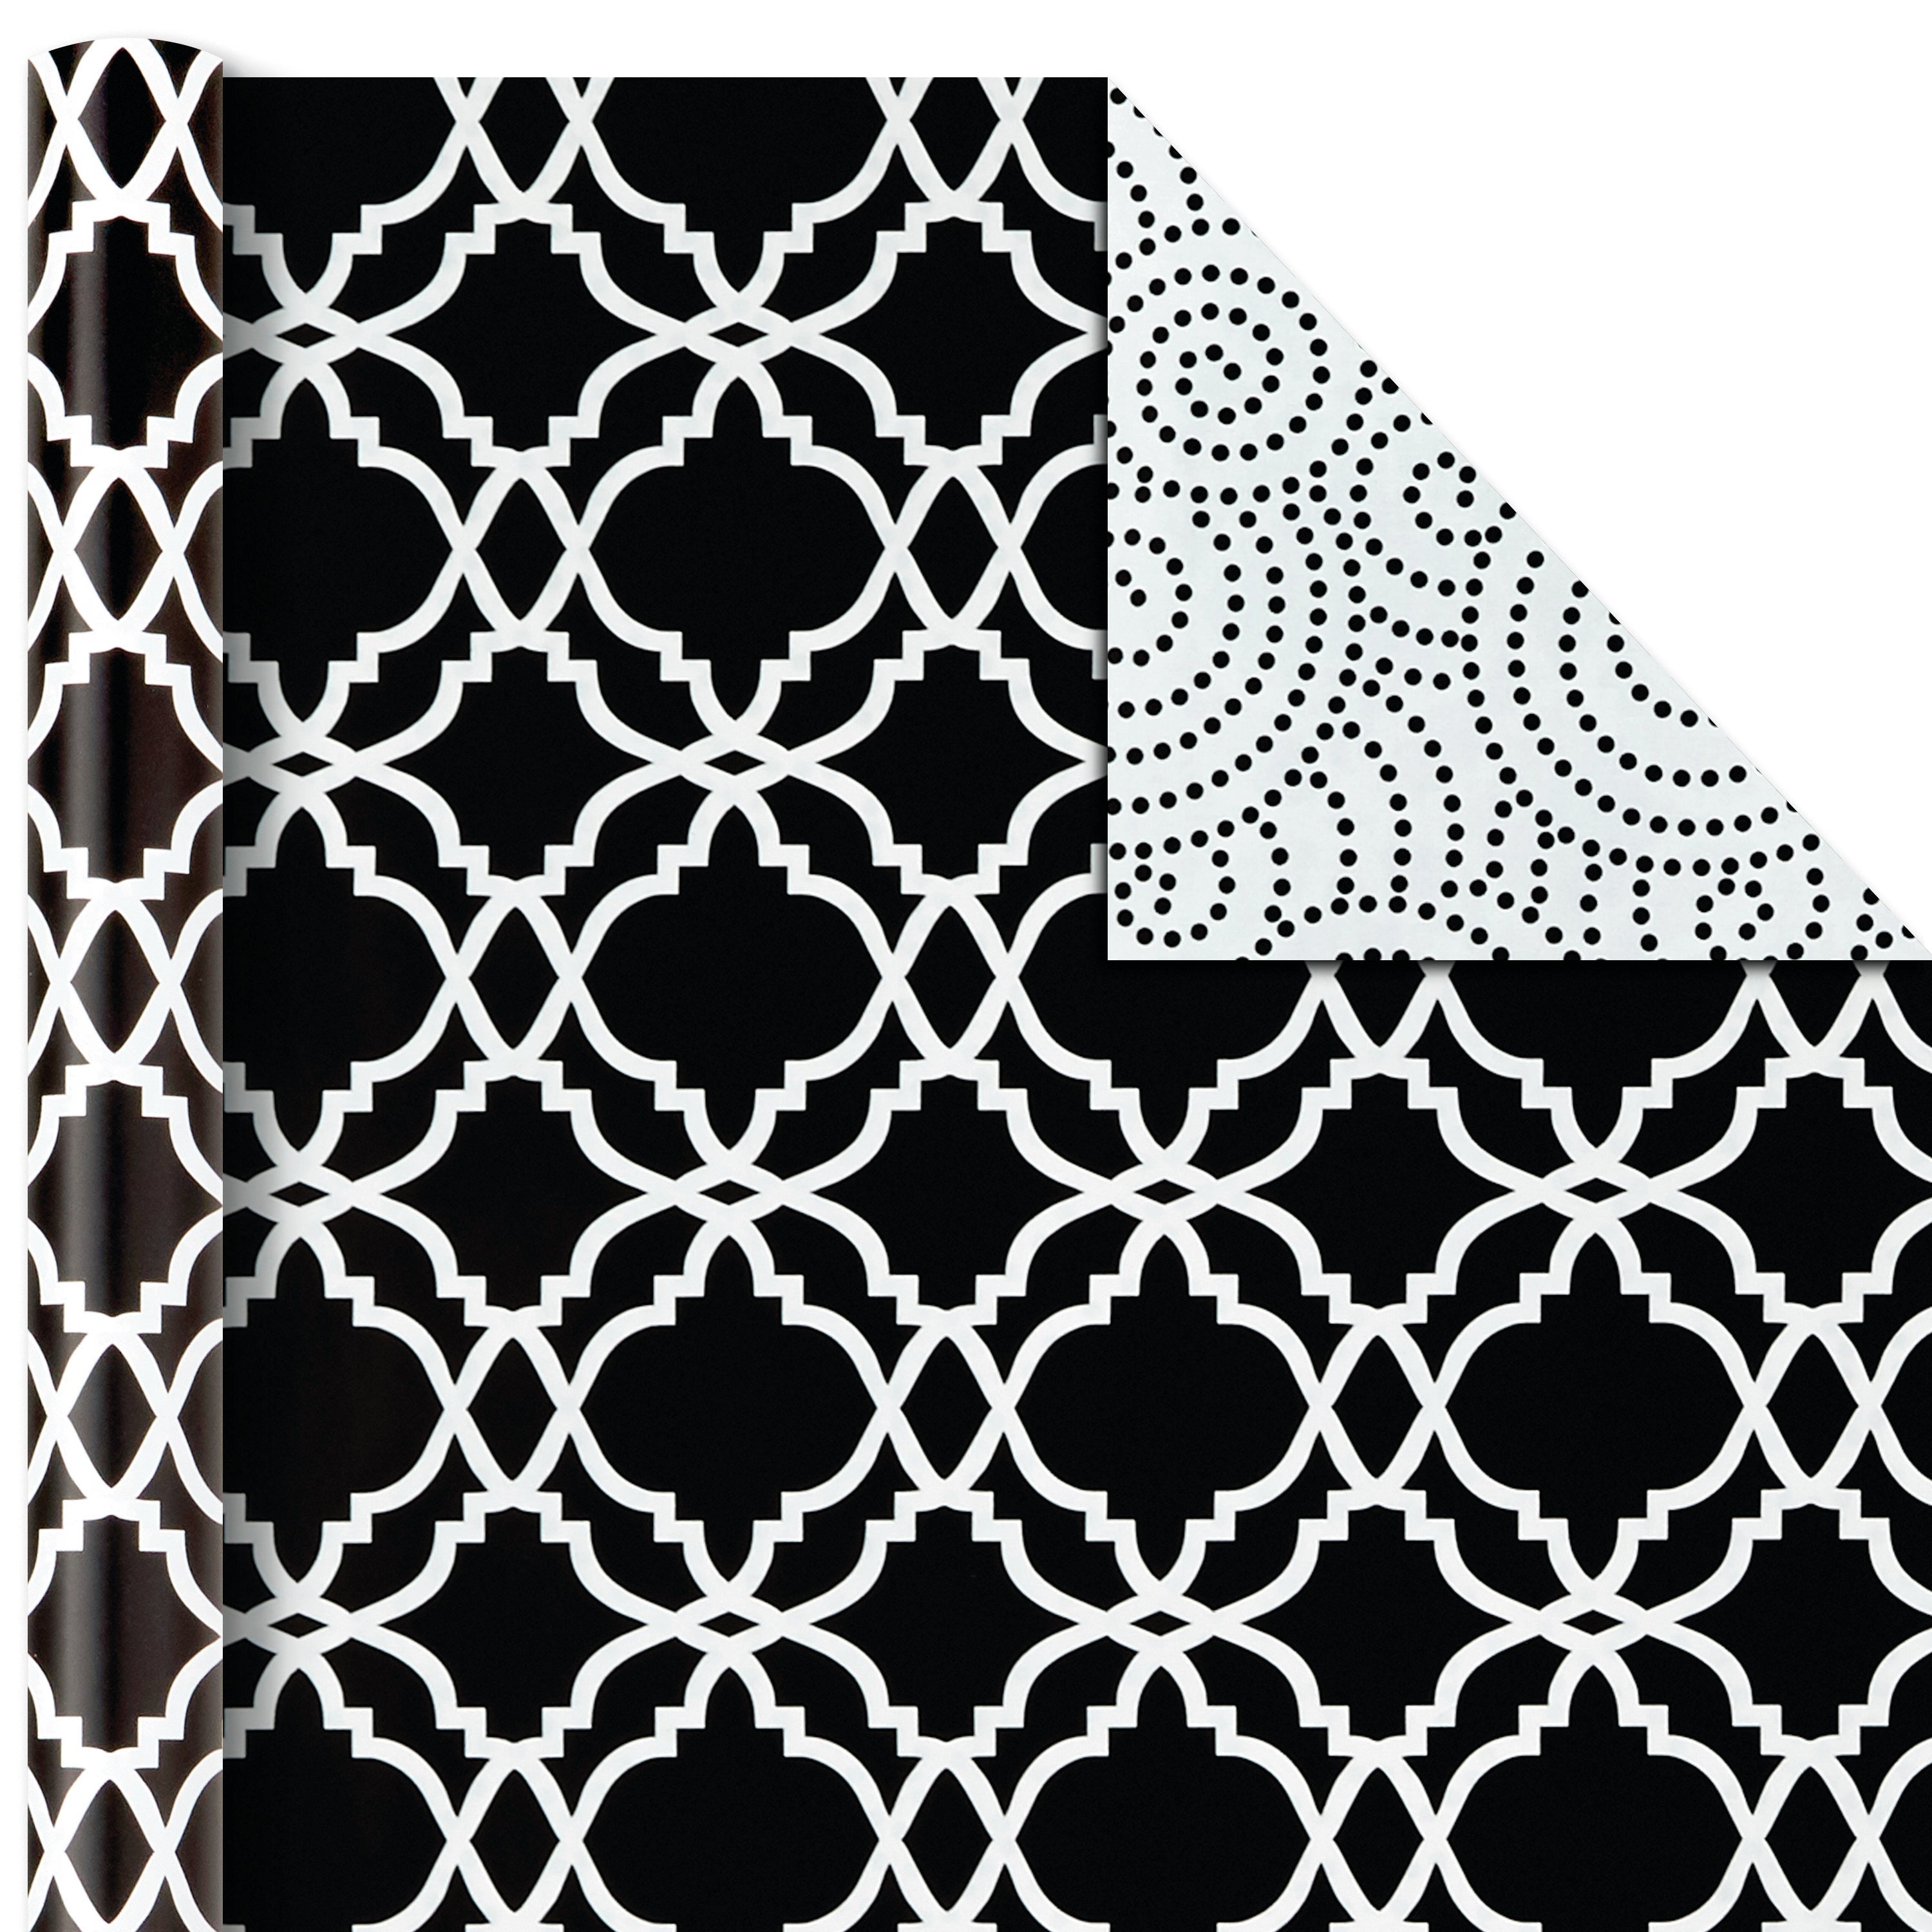 Hallmark All Occasion Reversible Wrapping Paper Bundle - Black and White Flowers and Dots (3-Pack: 75 sq. ft. ttl.) for Birthdays, Weddings, Graduations, Valentine's Day, Anniversaries and More